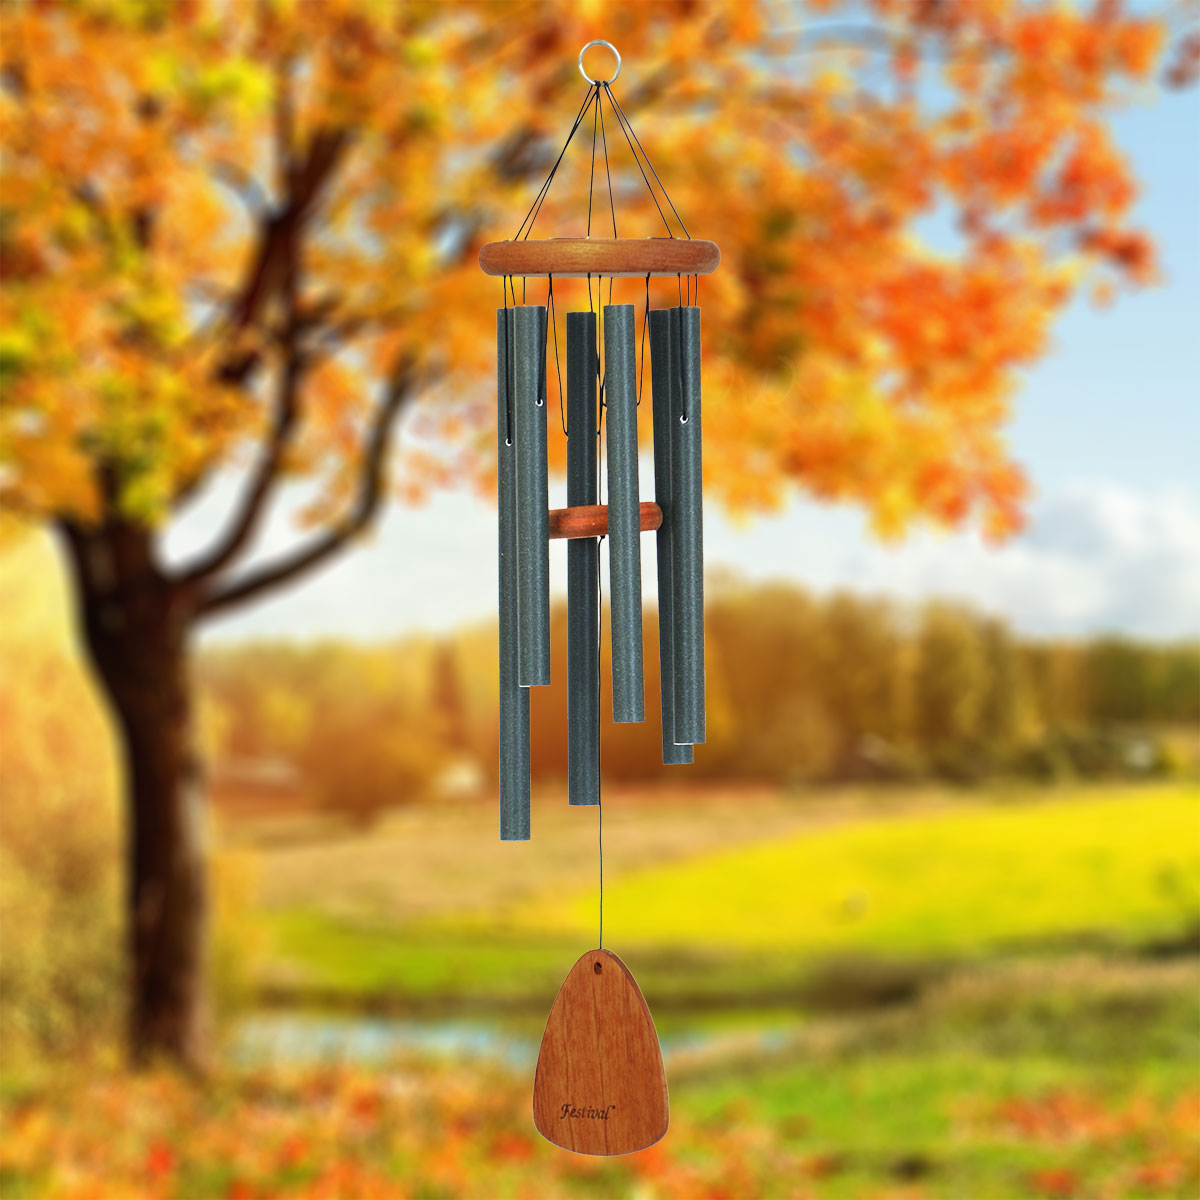 Festival 30-inch 6-Tube Wind chime in Forest Green